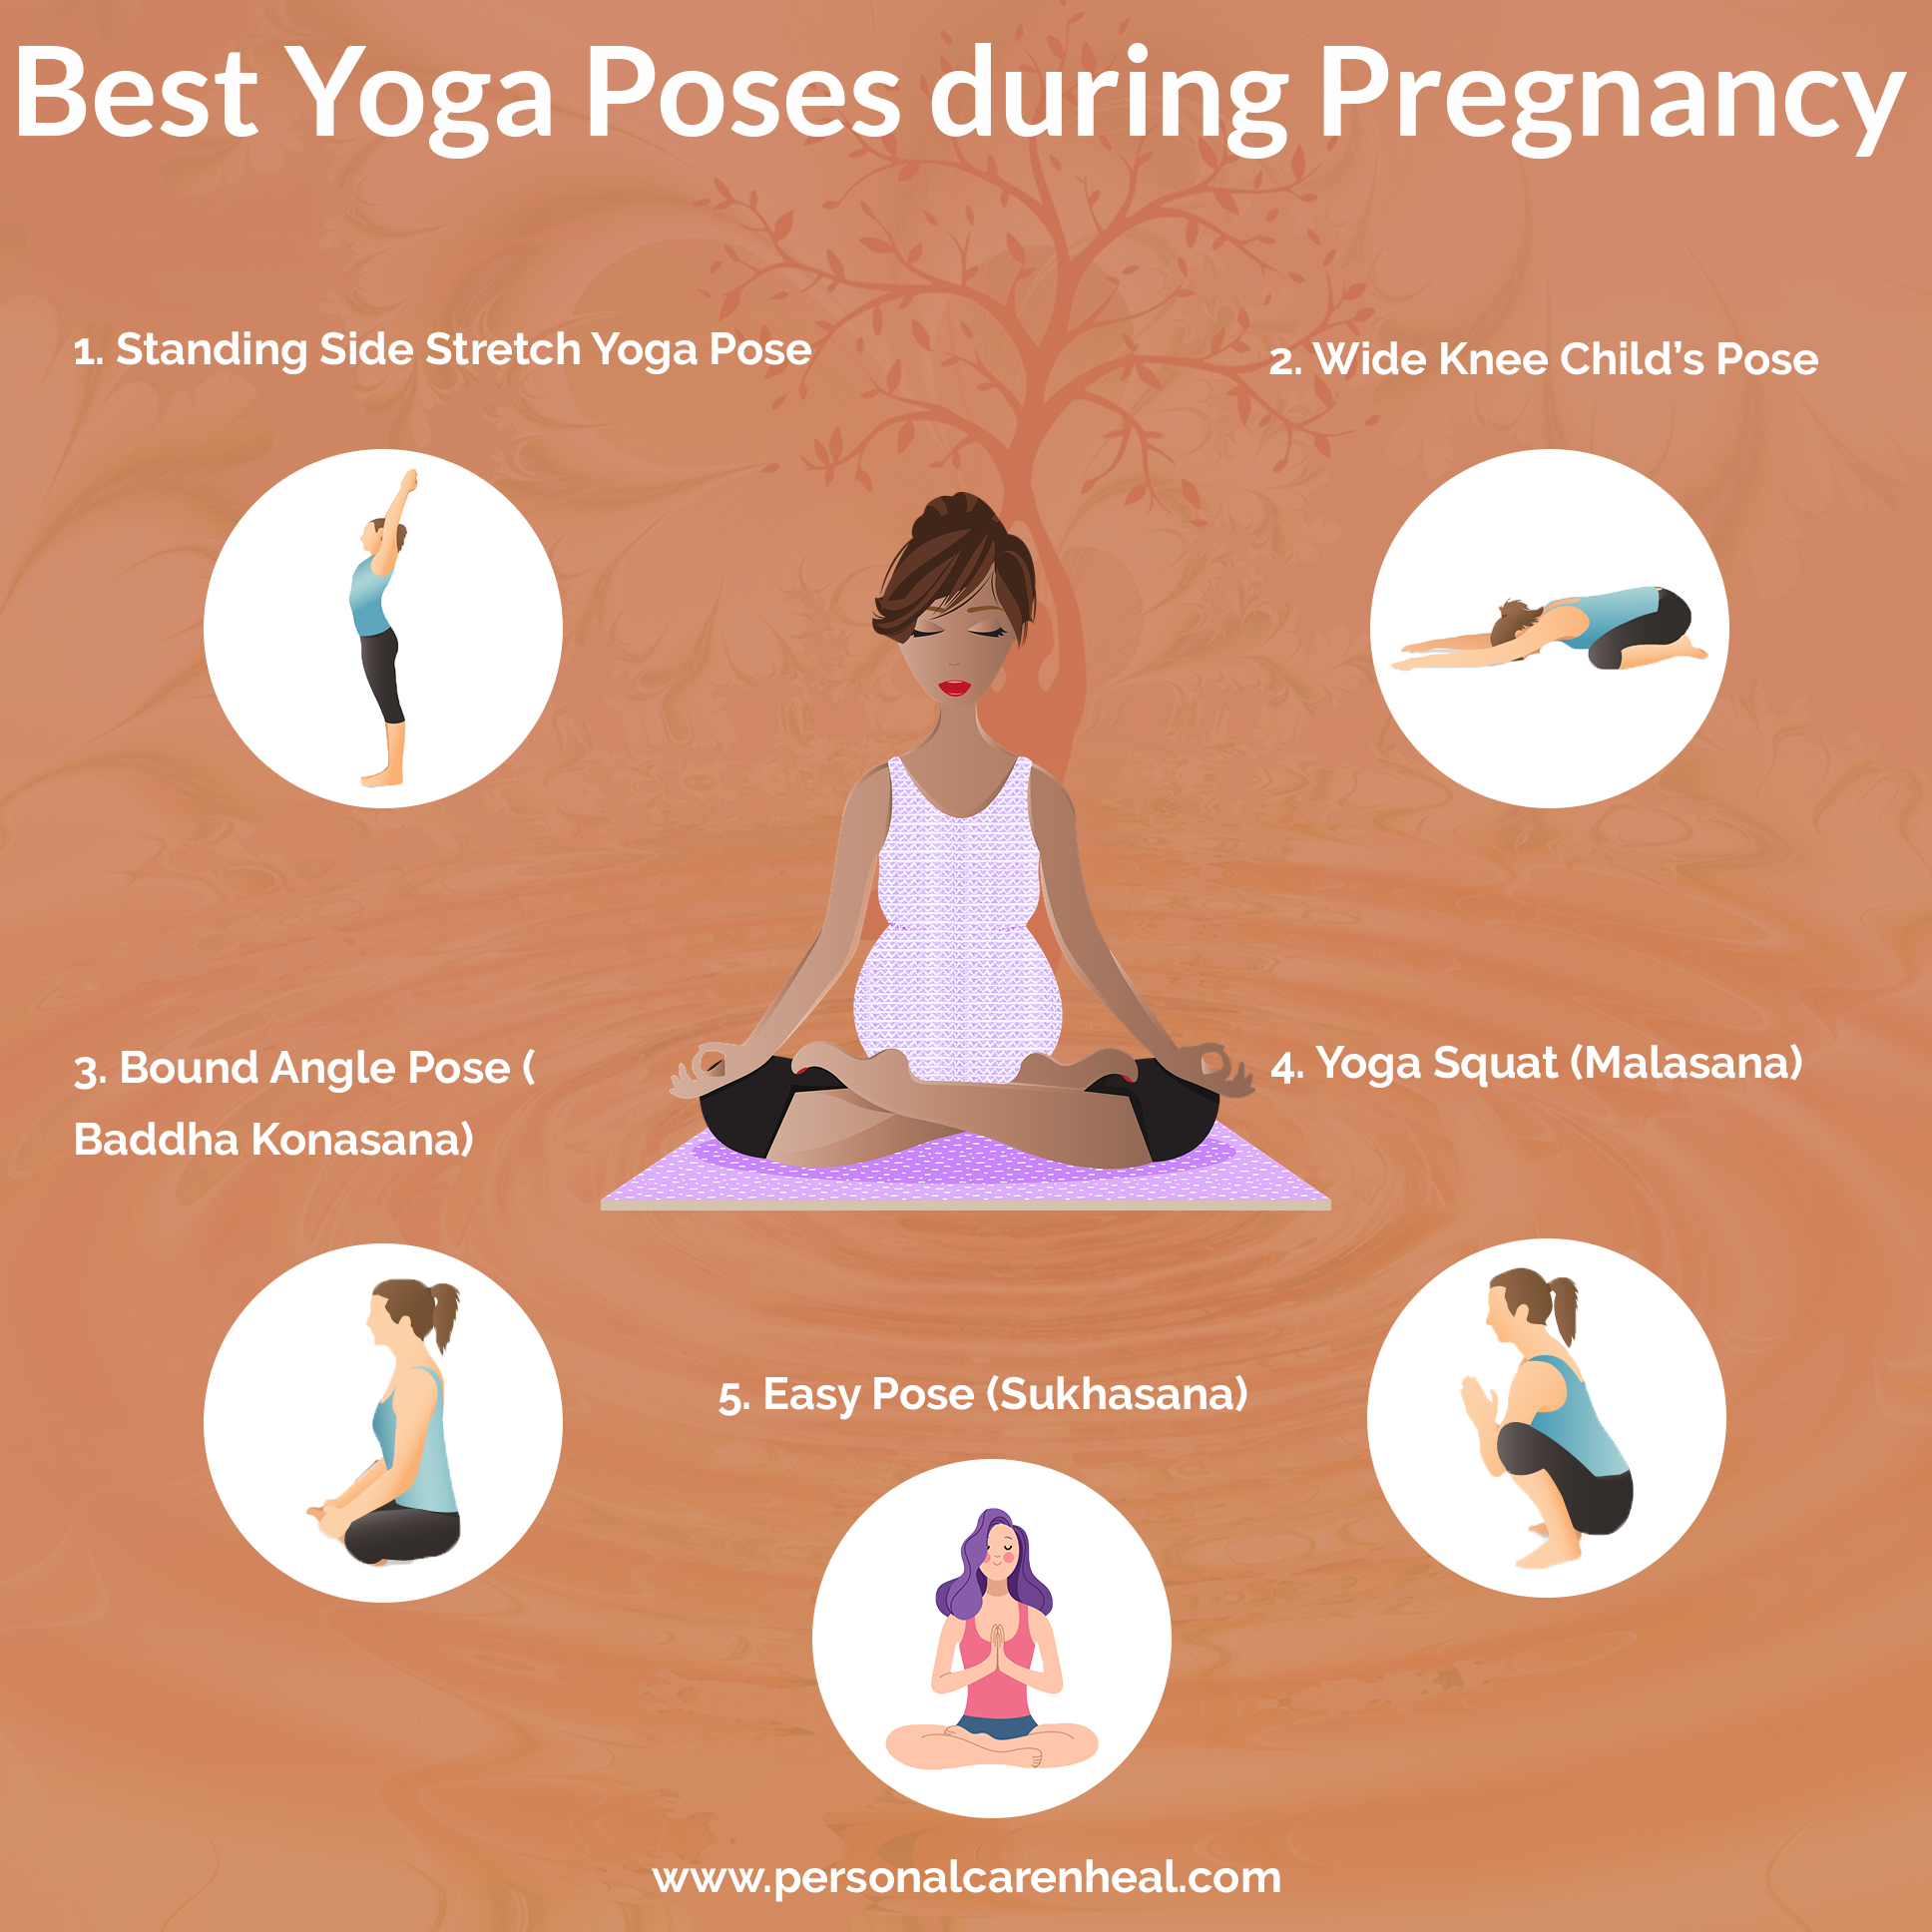 Best Yoga Poses During Pregnancy